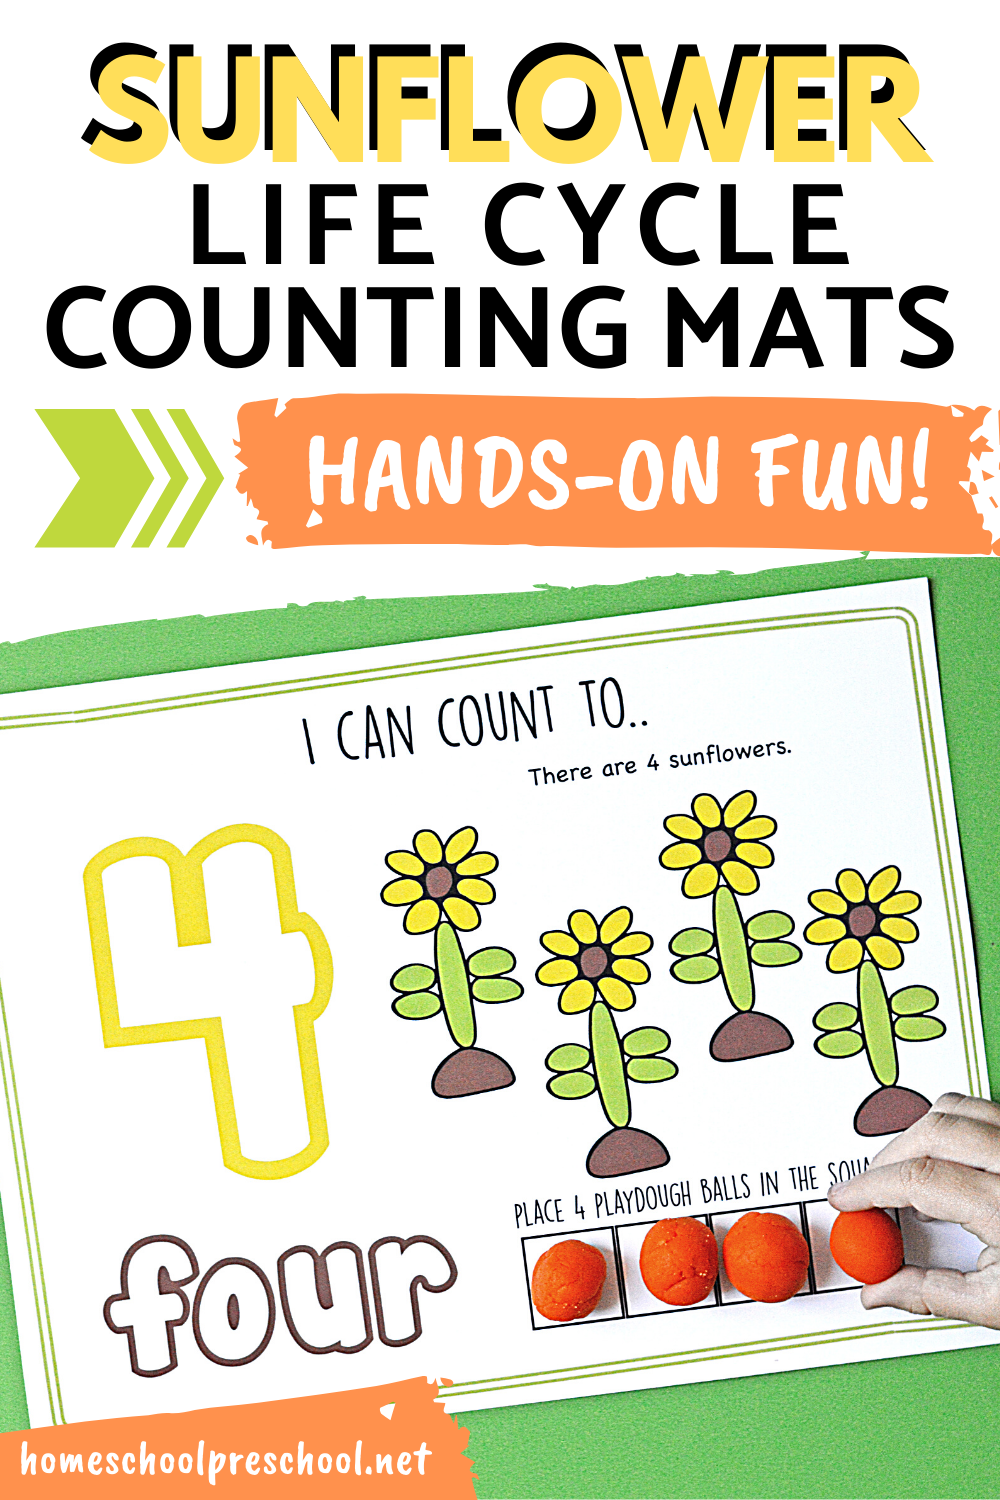 These sunflower life cycle counting mats are a fun way to review the stages of the life cycle while working on one-to-one correspondence and counting.